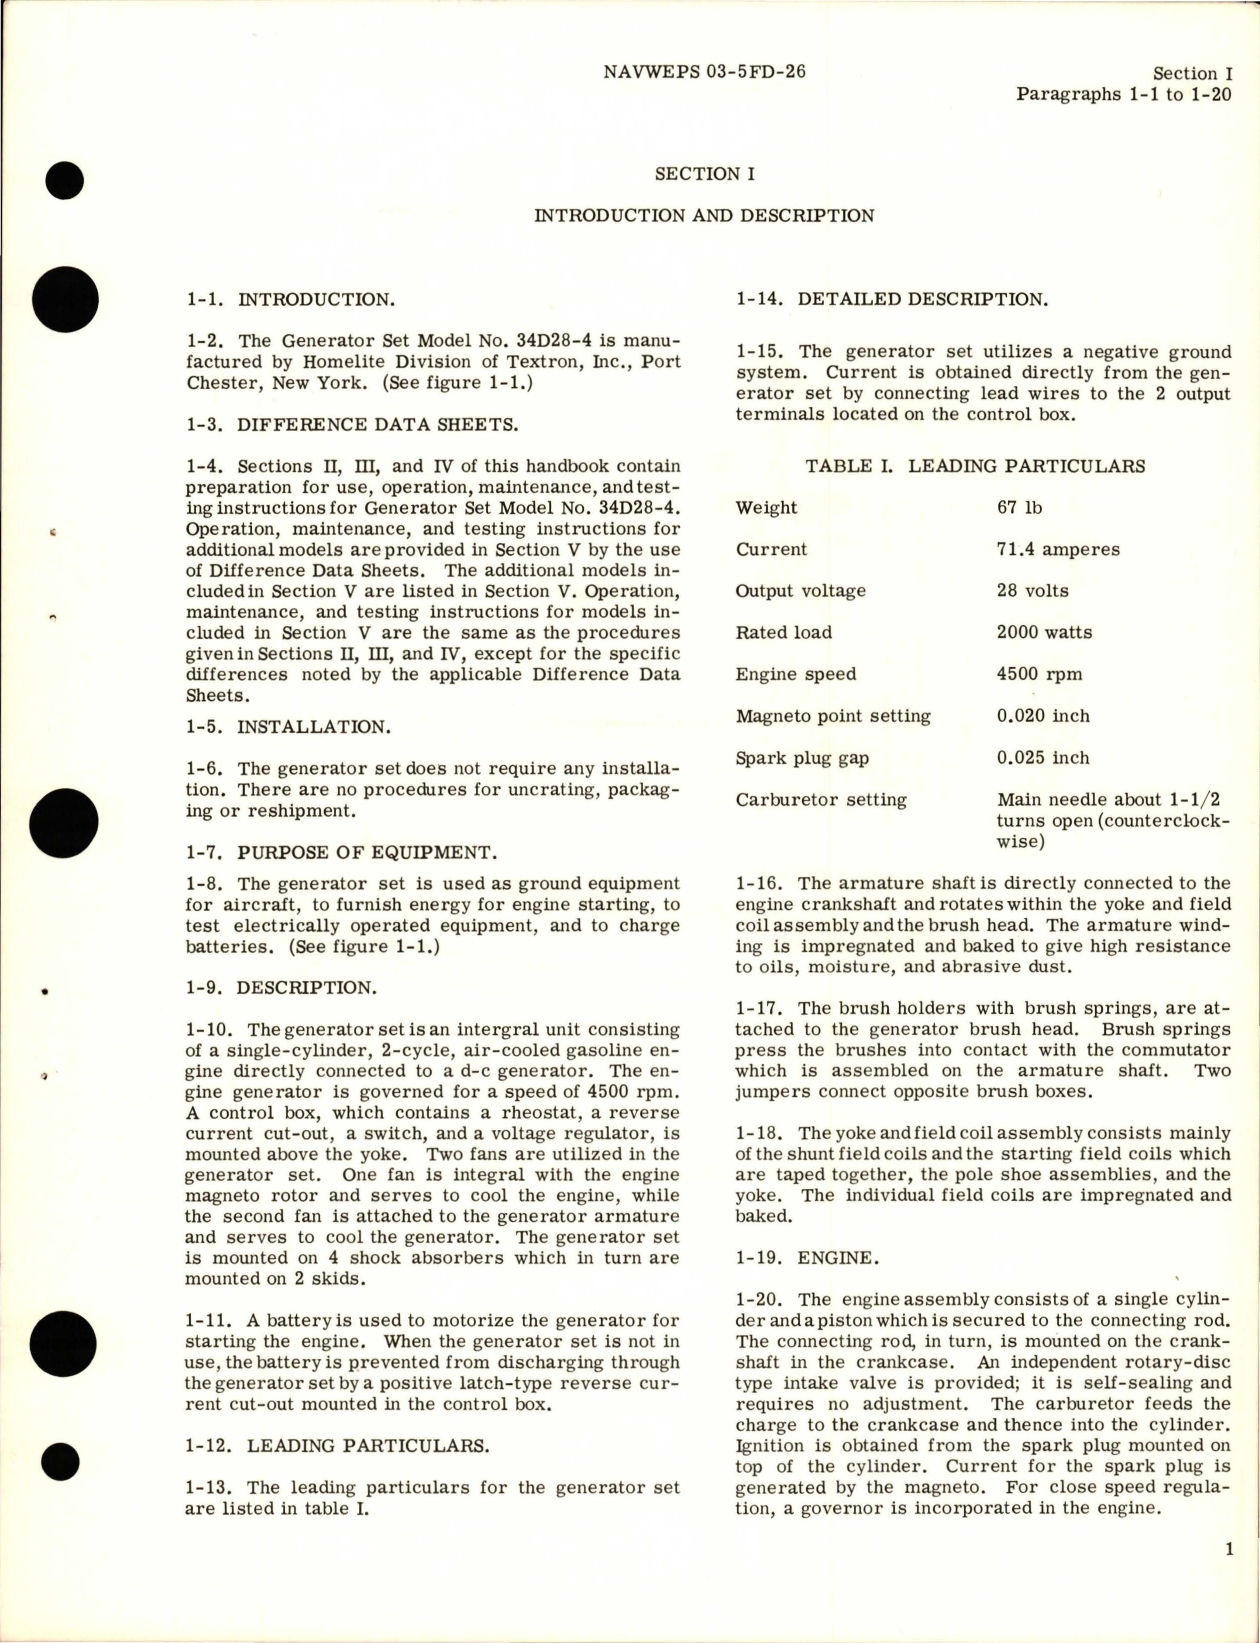 Sample page 5 from AirCorps Library document: Operation and Maintenance Instructions for Generator Set - Models 34D28-4, 34D28-5